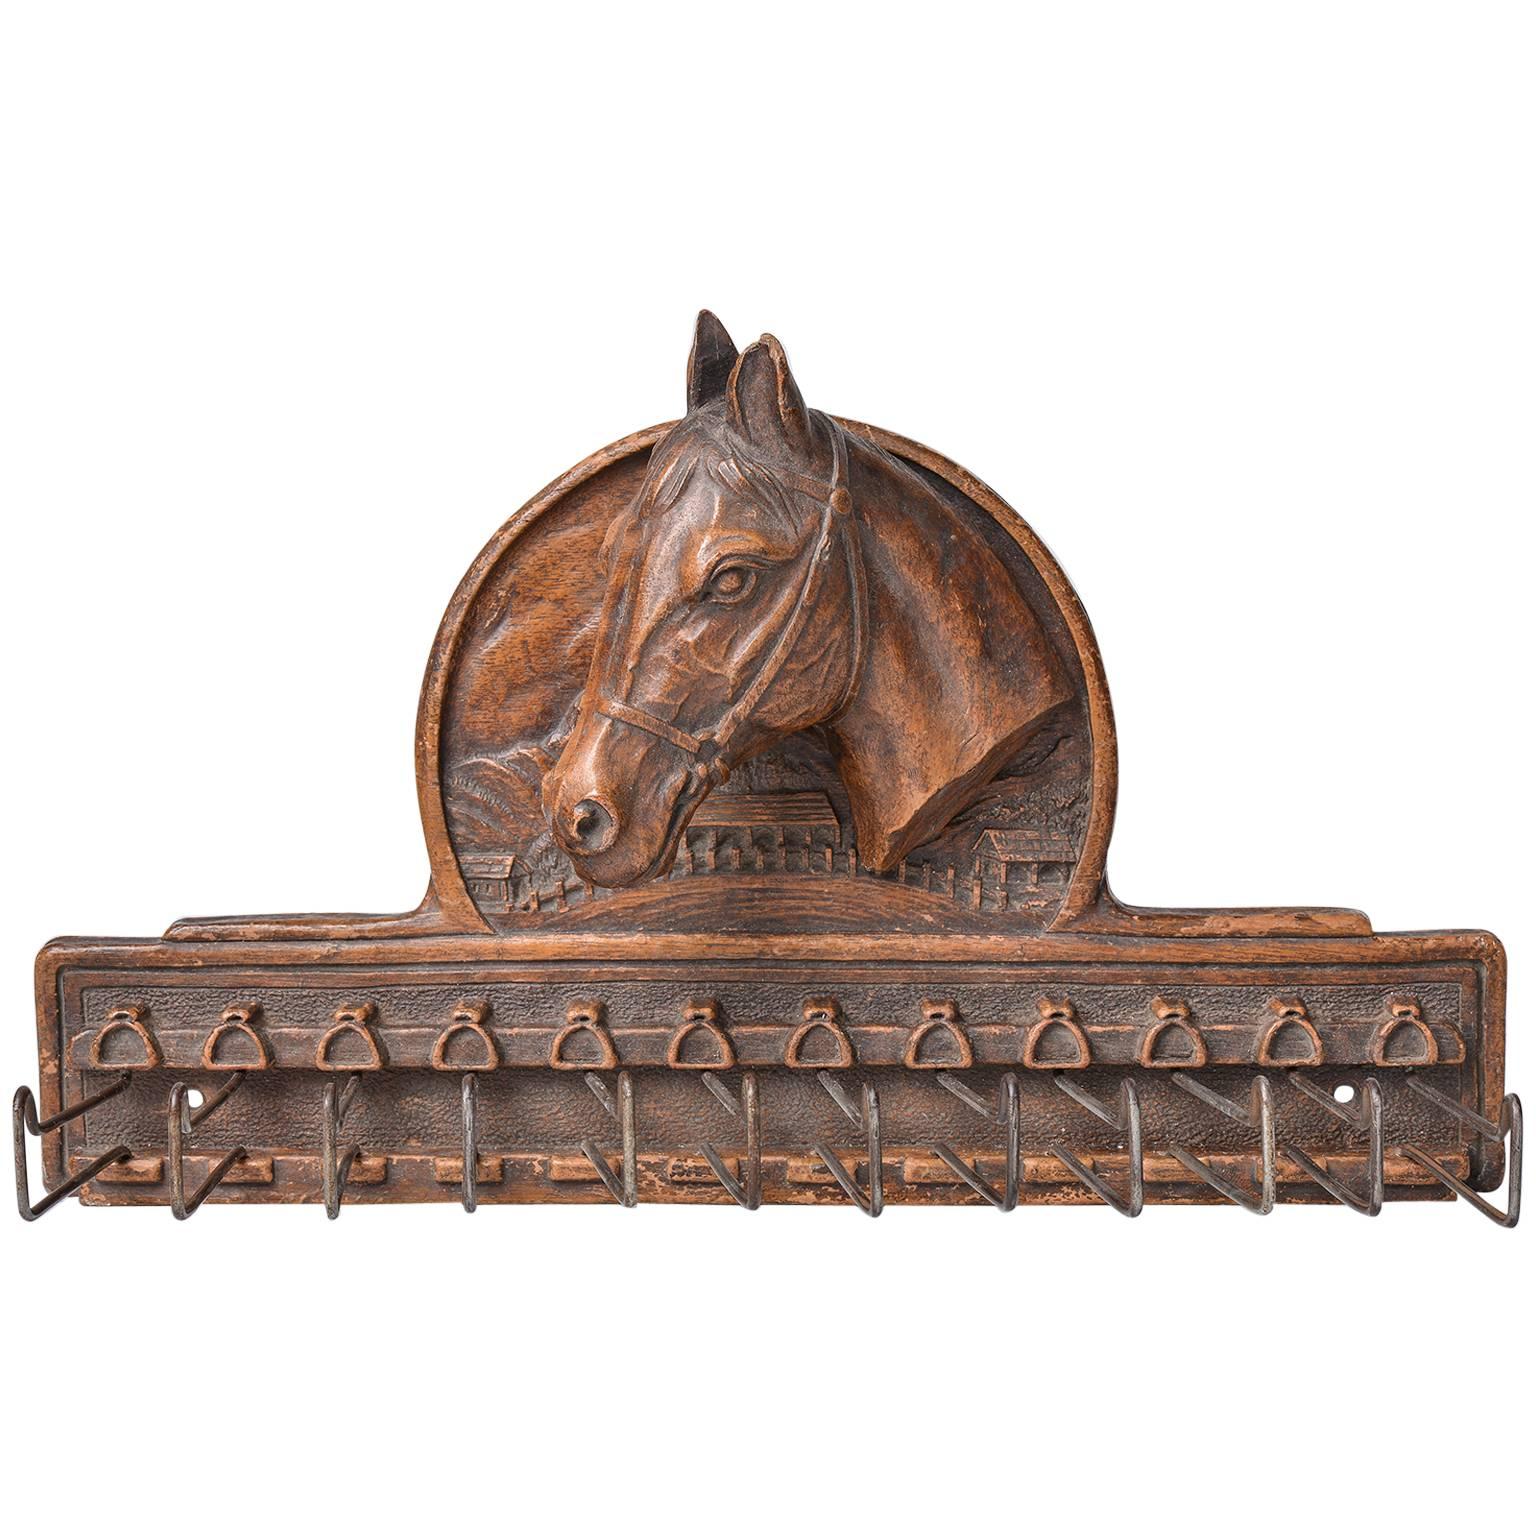  American Tie Rack or Belt Holder with Horse Head For Sale